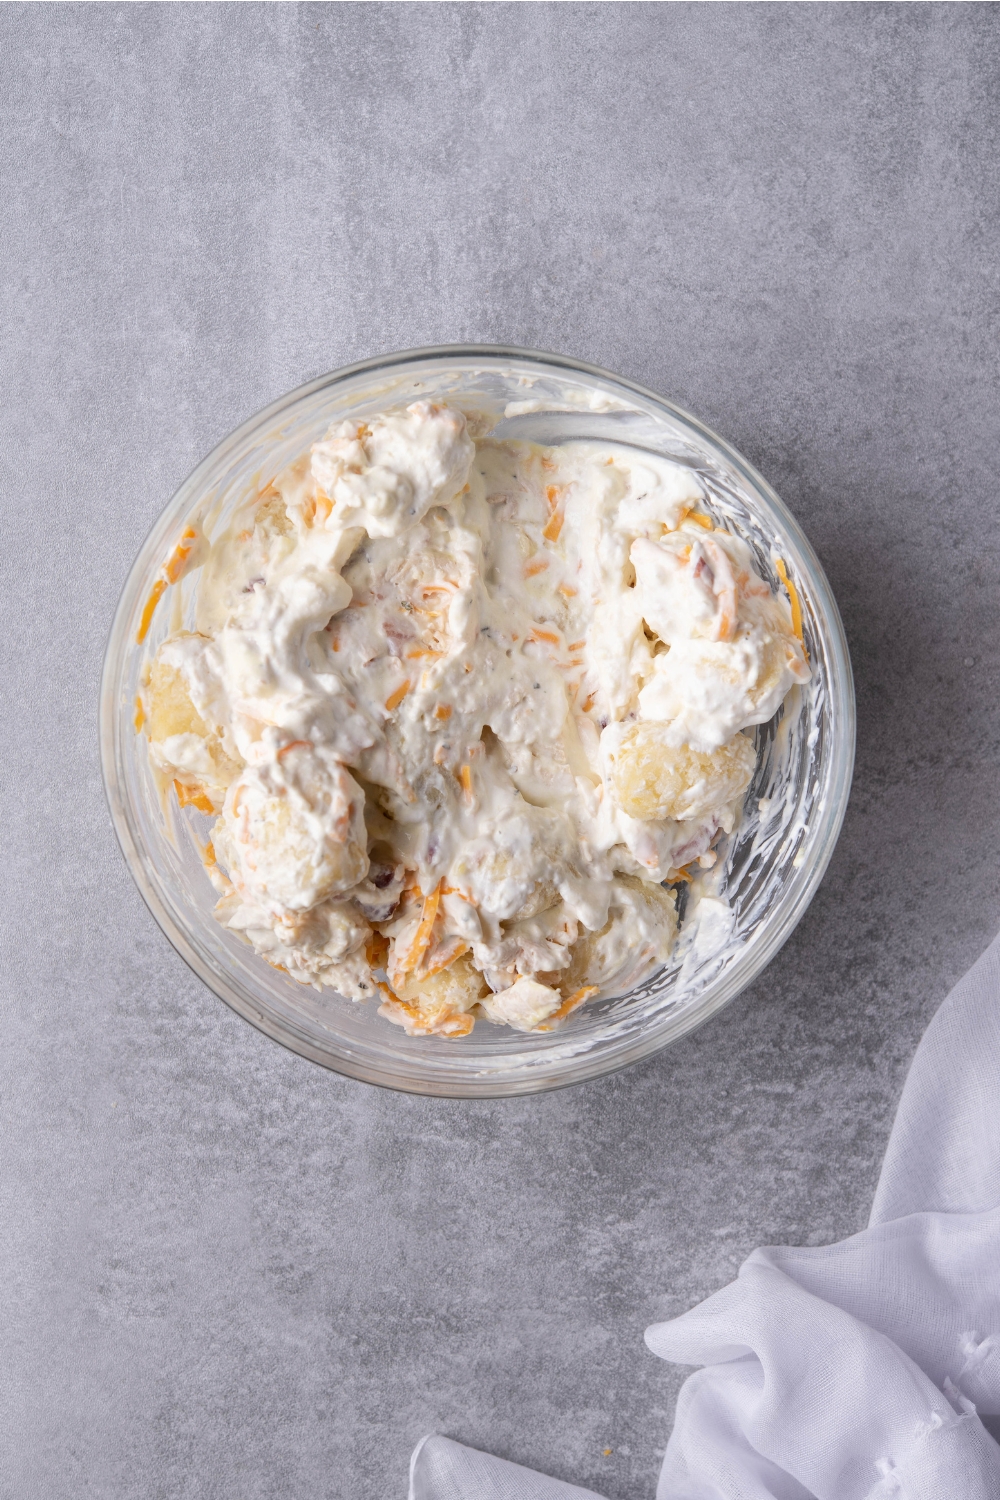 Sour cream and cheese mixture in a glass bowl on a gray counter.